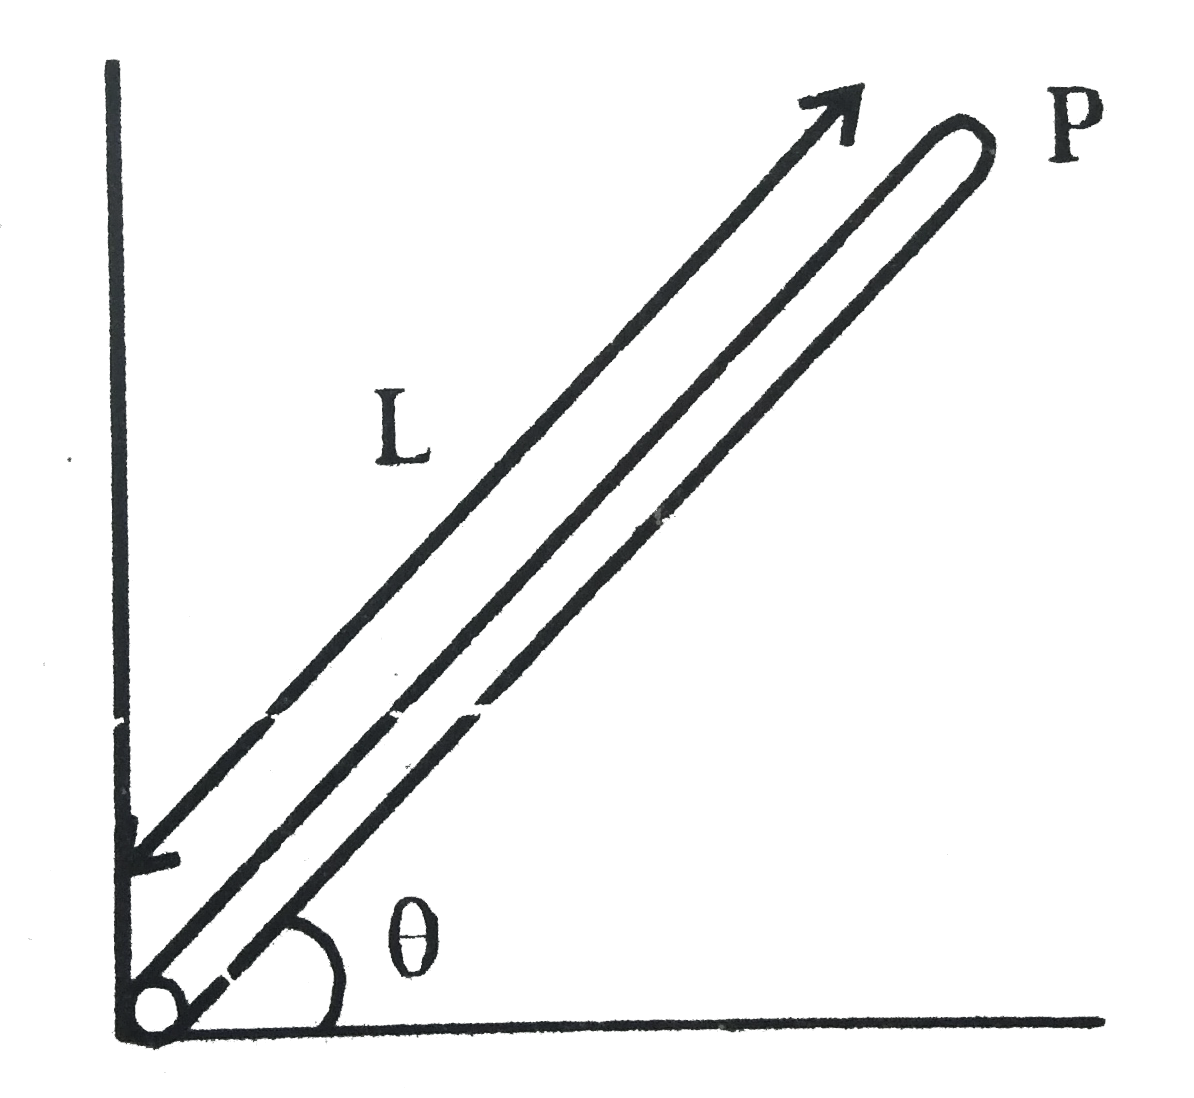 A uniform flag pole of length L  and mass M in pivoted on the ground with a frictionless hinge. The flag pole makes an angle theta with the horizontal. The moment of inertia of the flag pole about one end is (1//3) ML^(2). If starts falling from the position shown in figure, the linear acceleration of the free end of the flag pole-labeled P - would be.   .